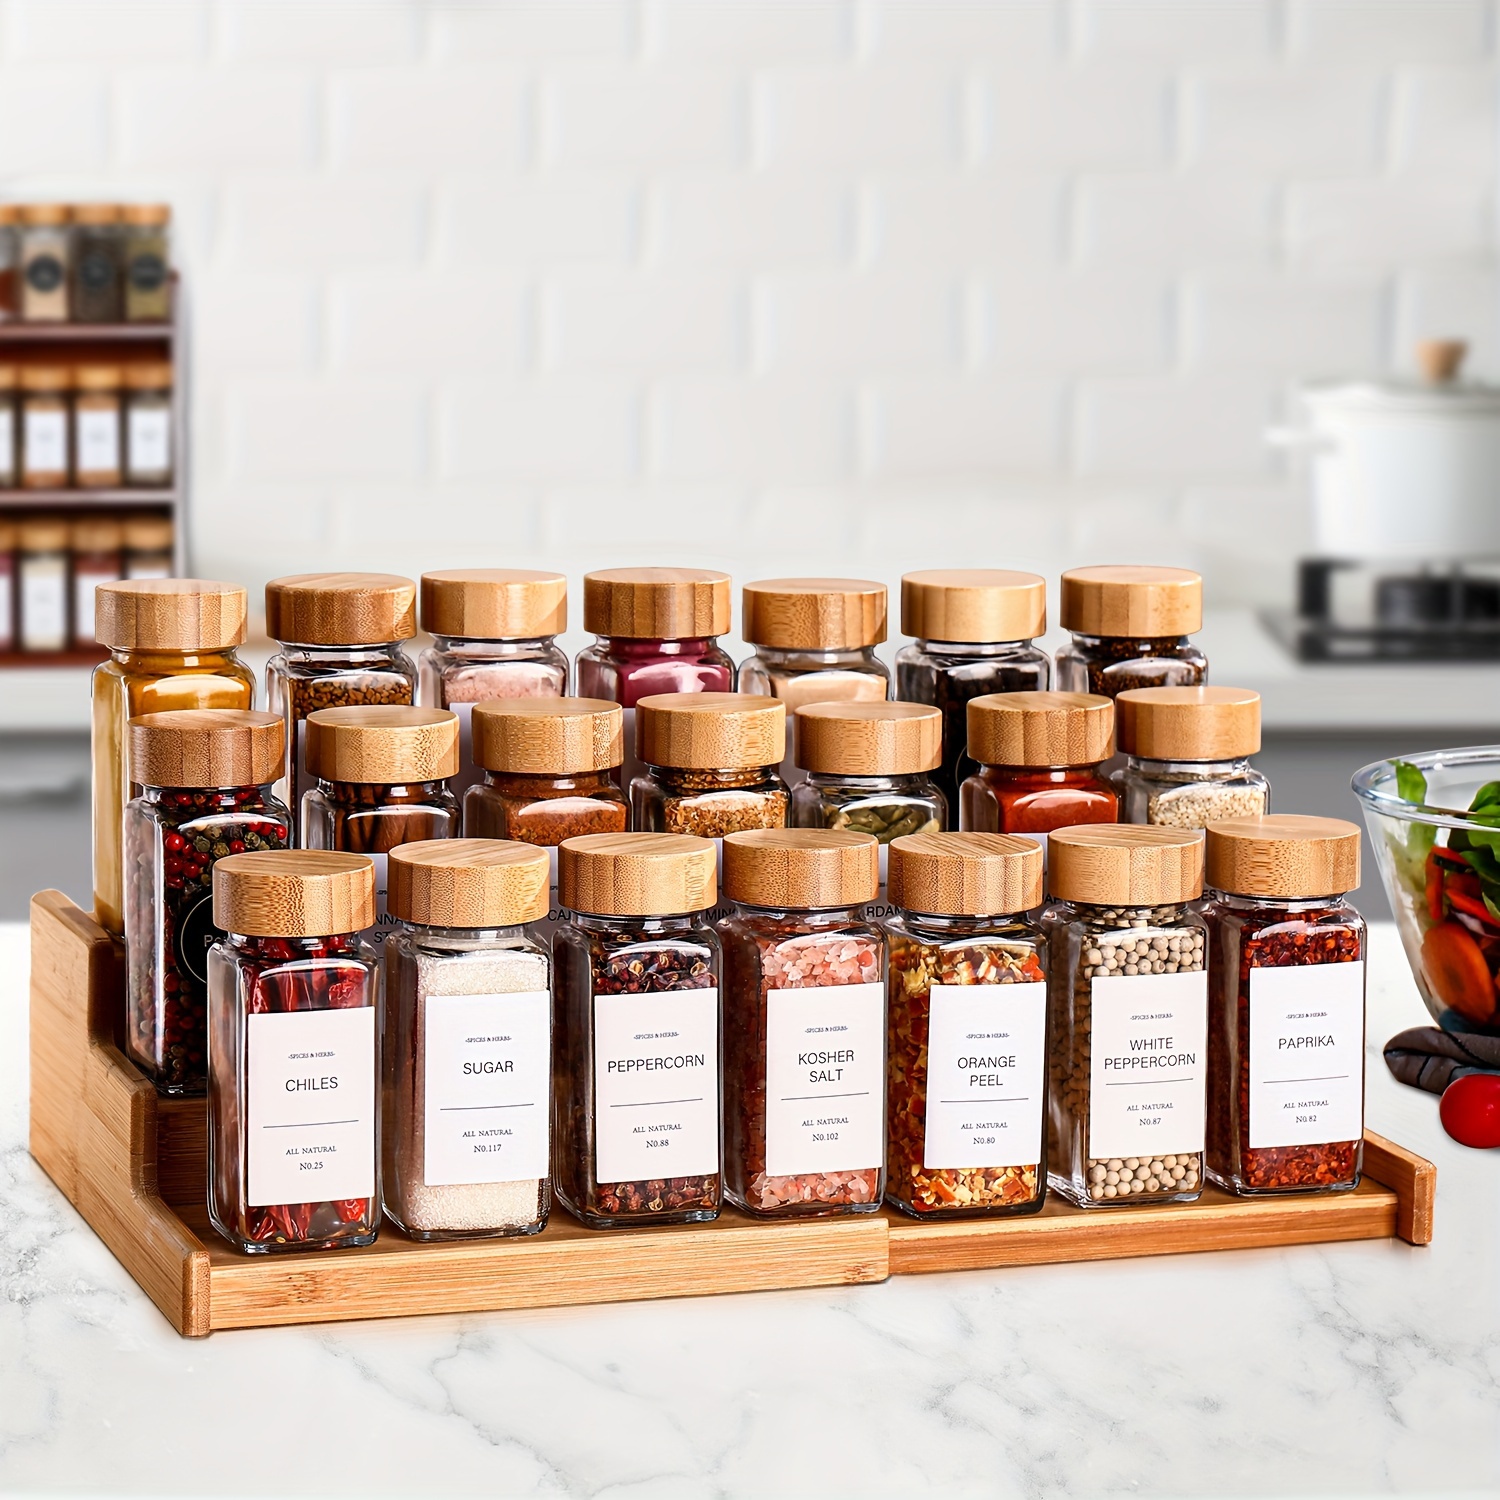 24 Spice Jars with Labels- Spice Jars with Bamboo Lids - 4 Oz Glass Spice